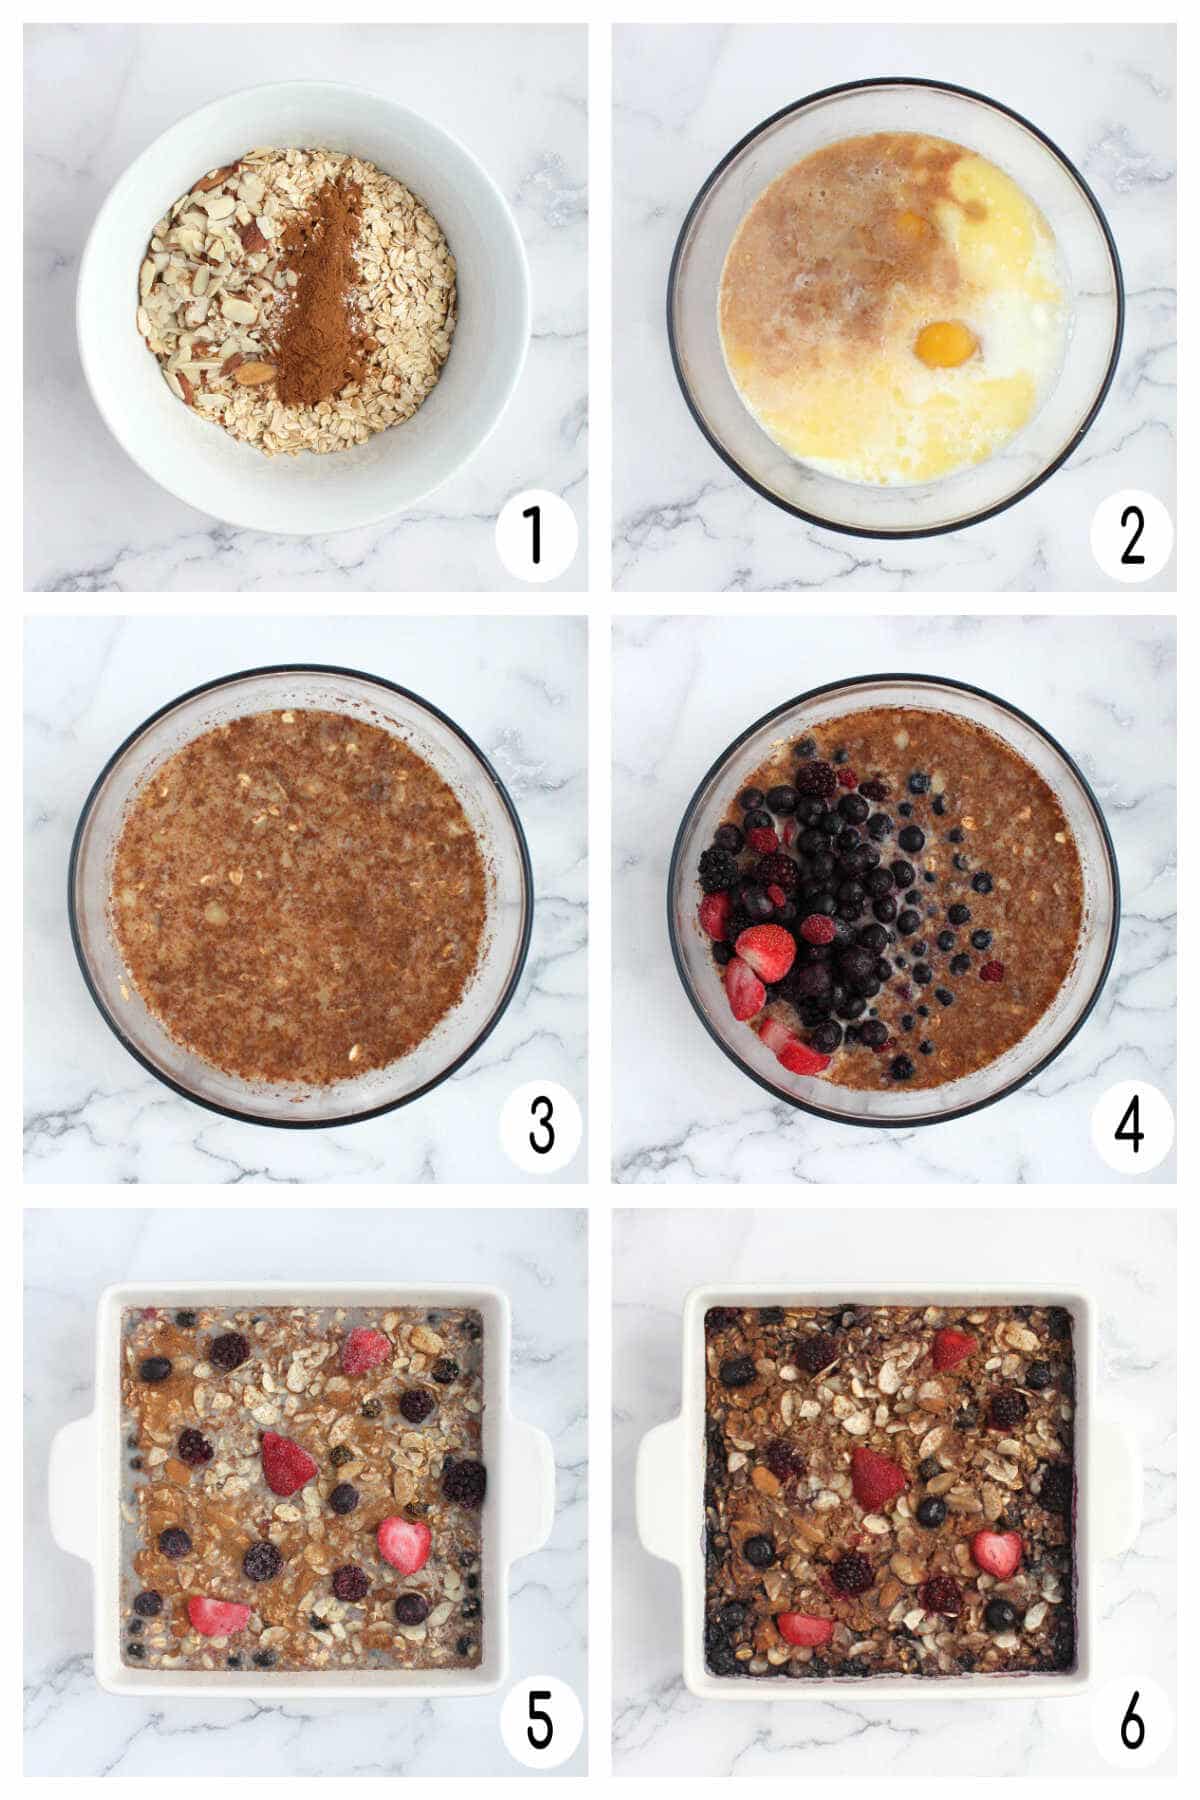 Process shots for the preparation of porridge baked with berries